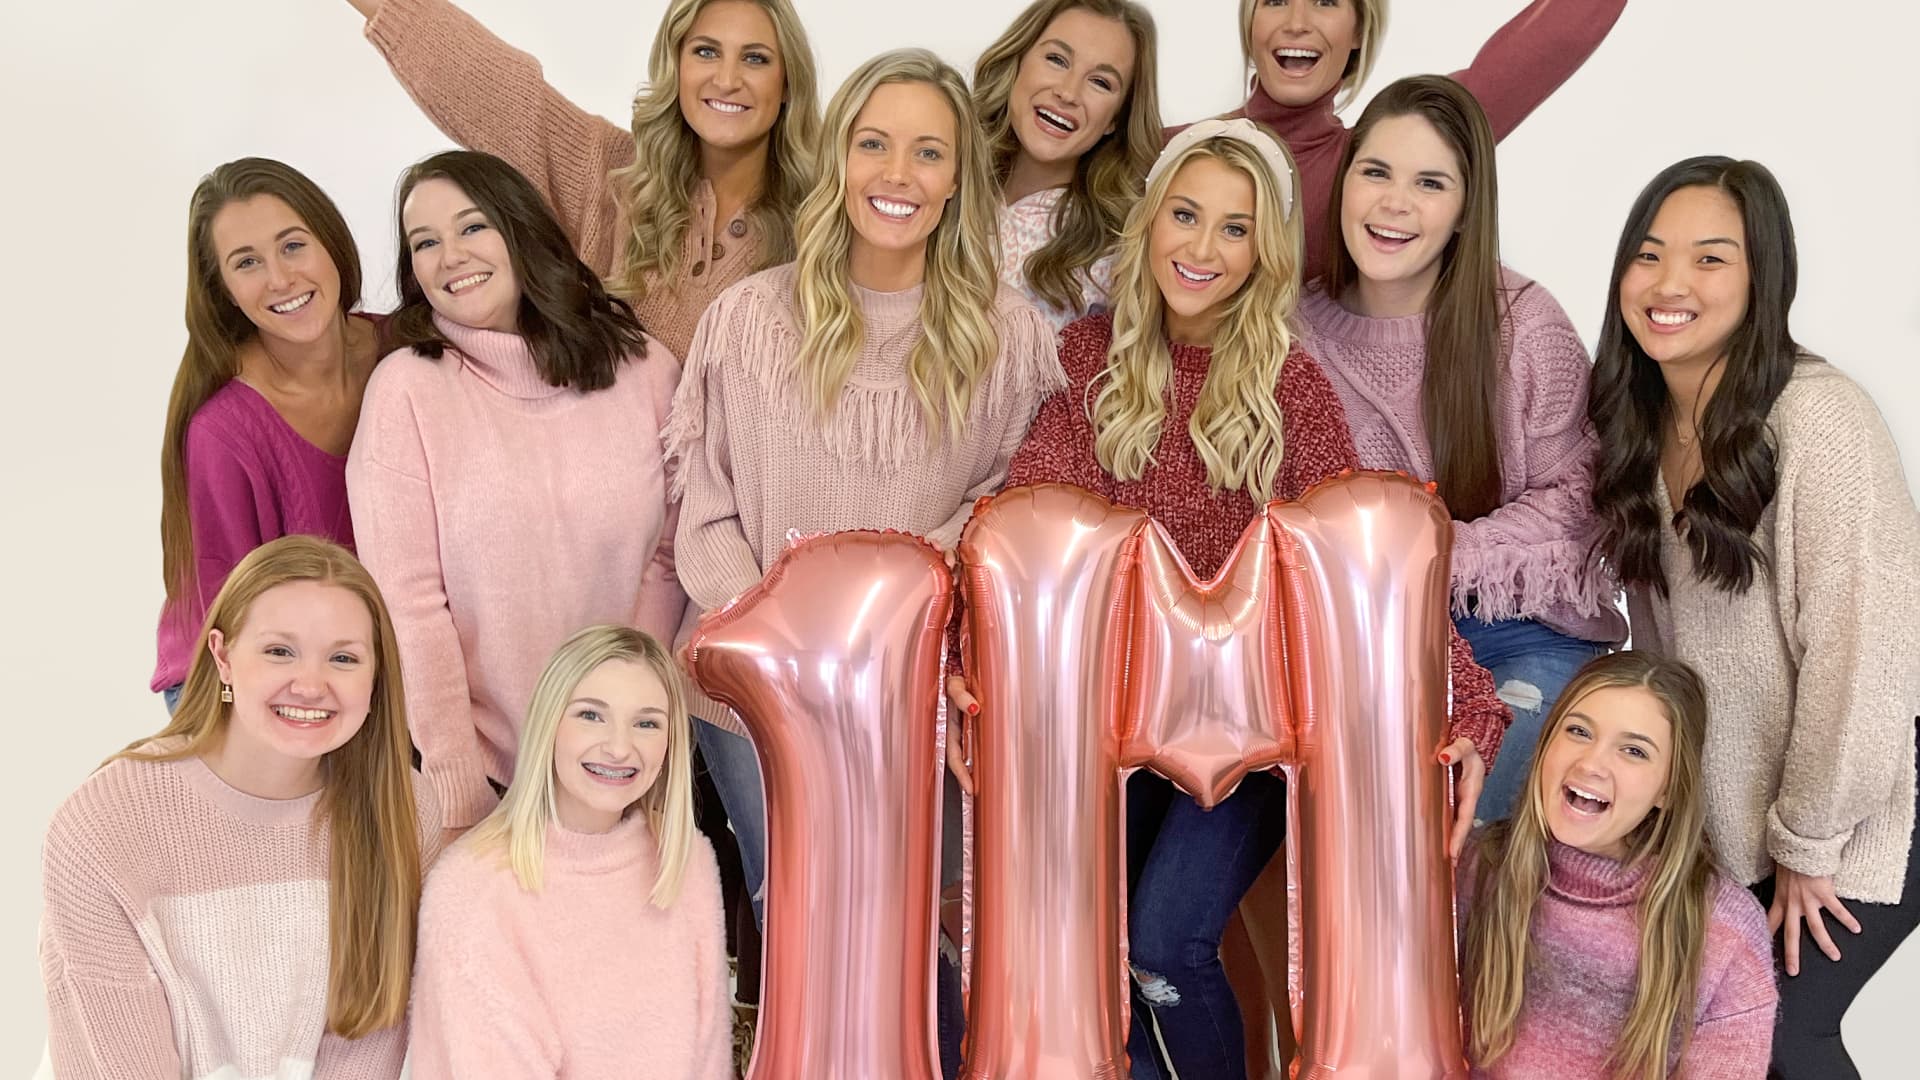 The Pink Lily team celebrating one million Instagram followers.